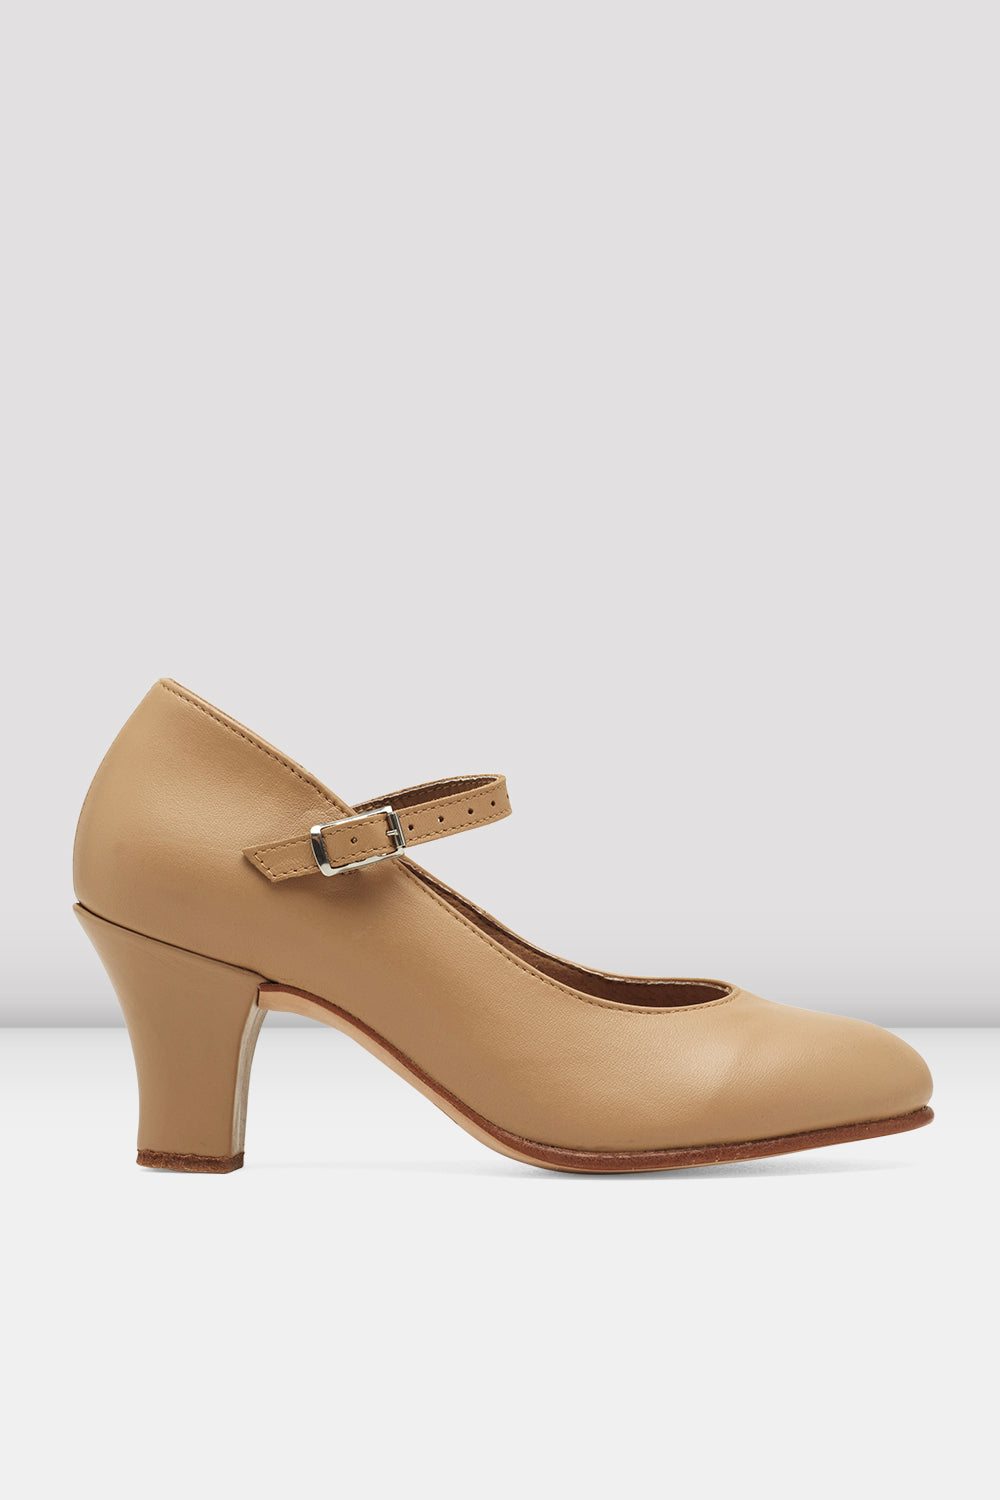 BLOCH Ladies Cabaret Character Shoes, Tan Leather